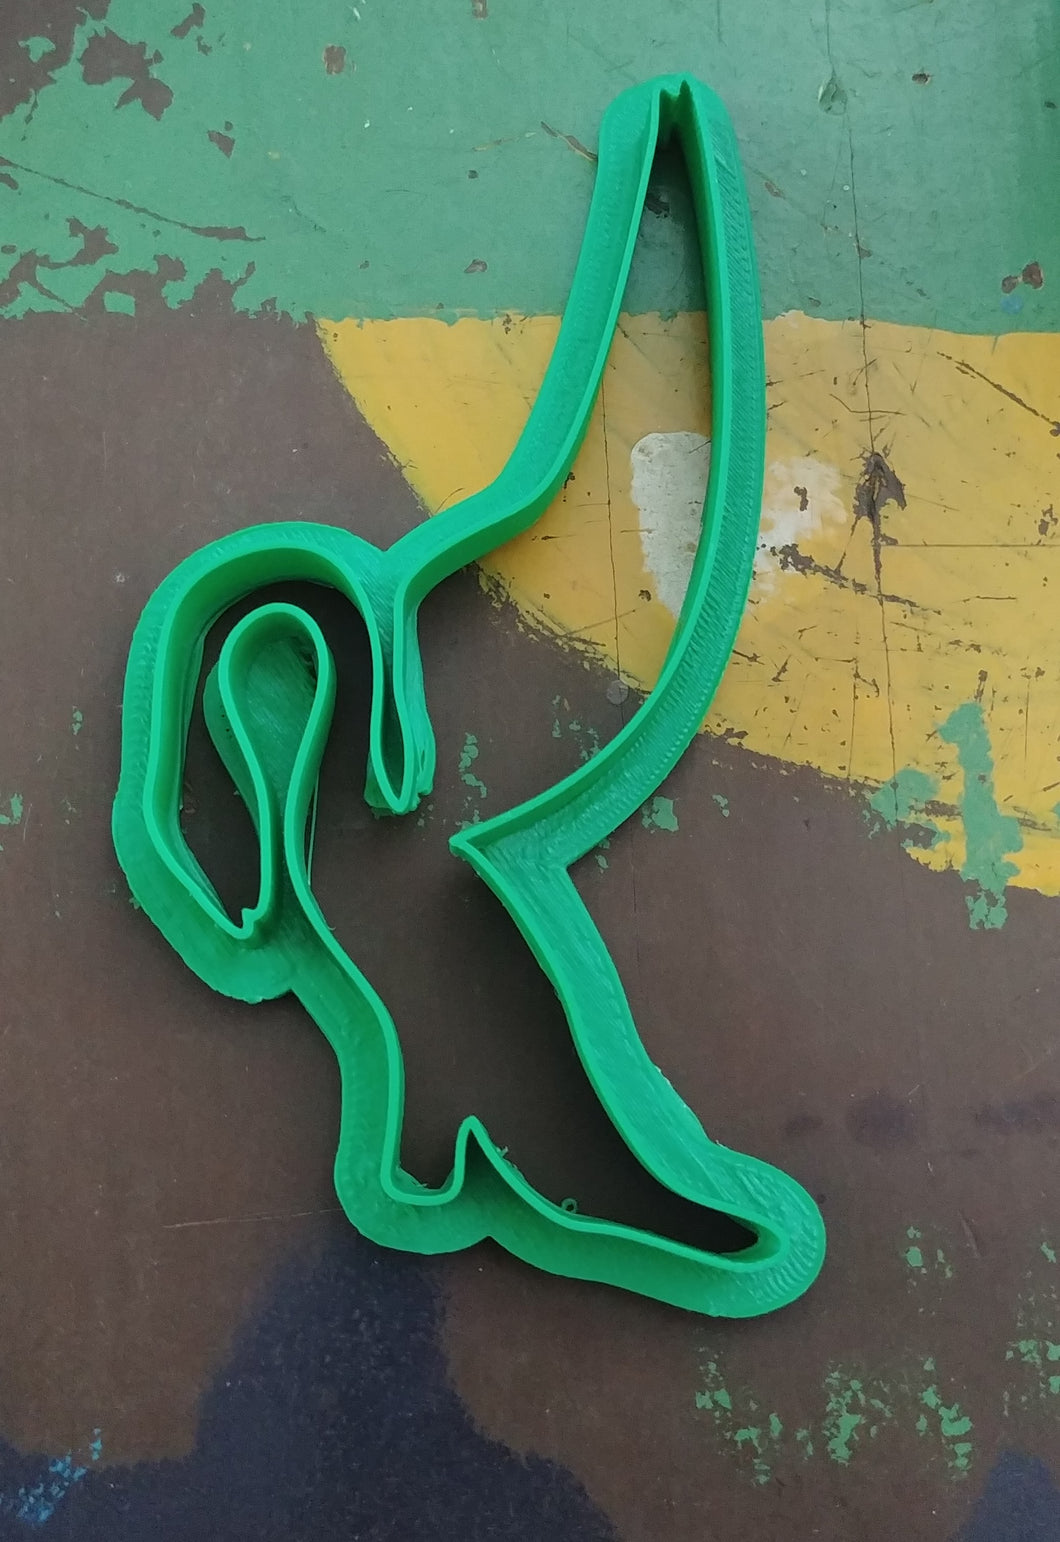 3D Printed Cookie Cutter Inspired by Packard Swan Hood Ornament